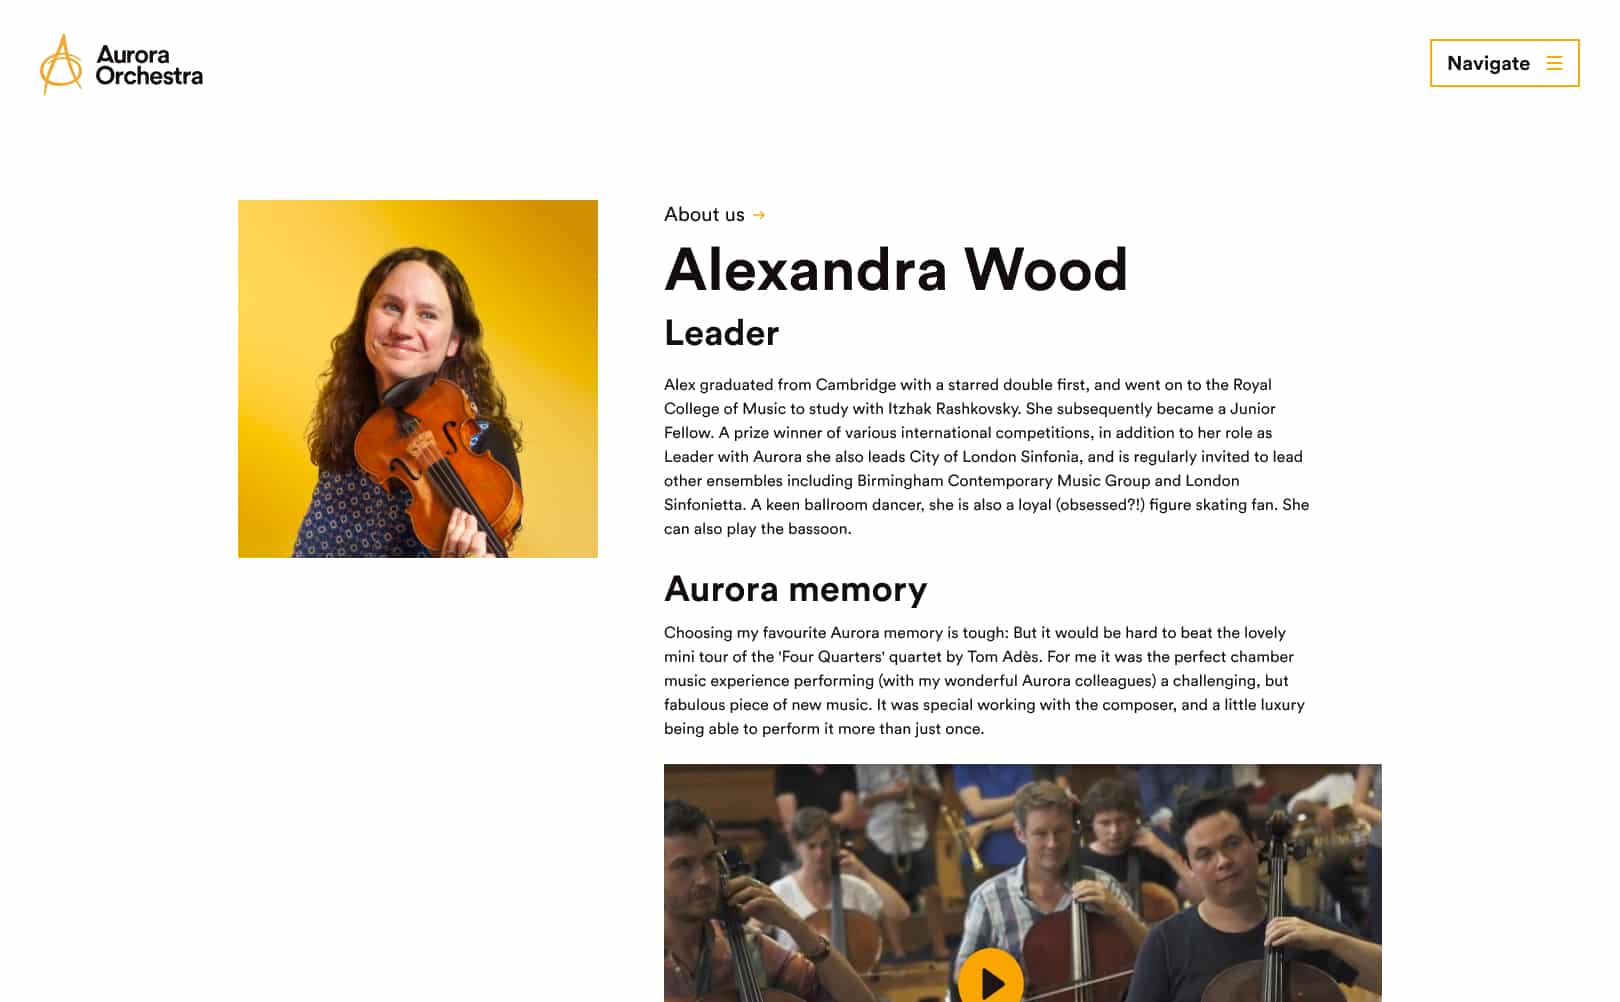 A performer page from the Aurora website, showing the profile of Alexandra Wood, a lead violinist. There's a photo of Alexandra, plus some biography text and a video.